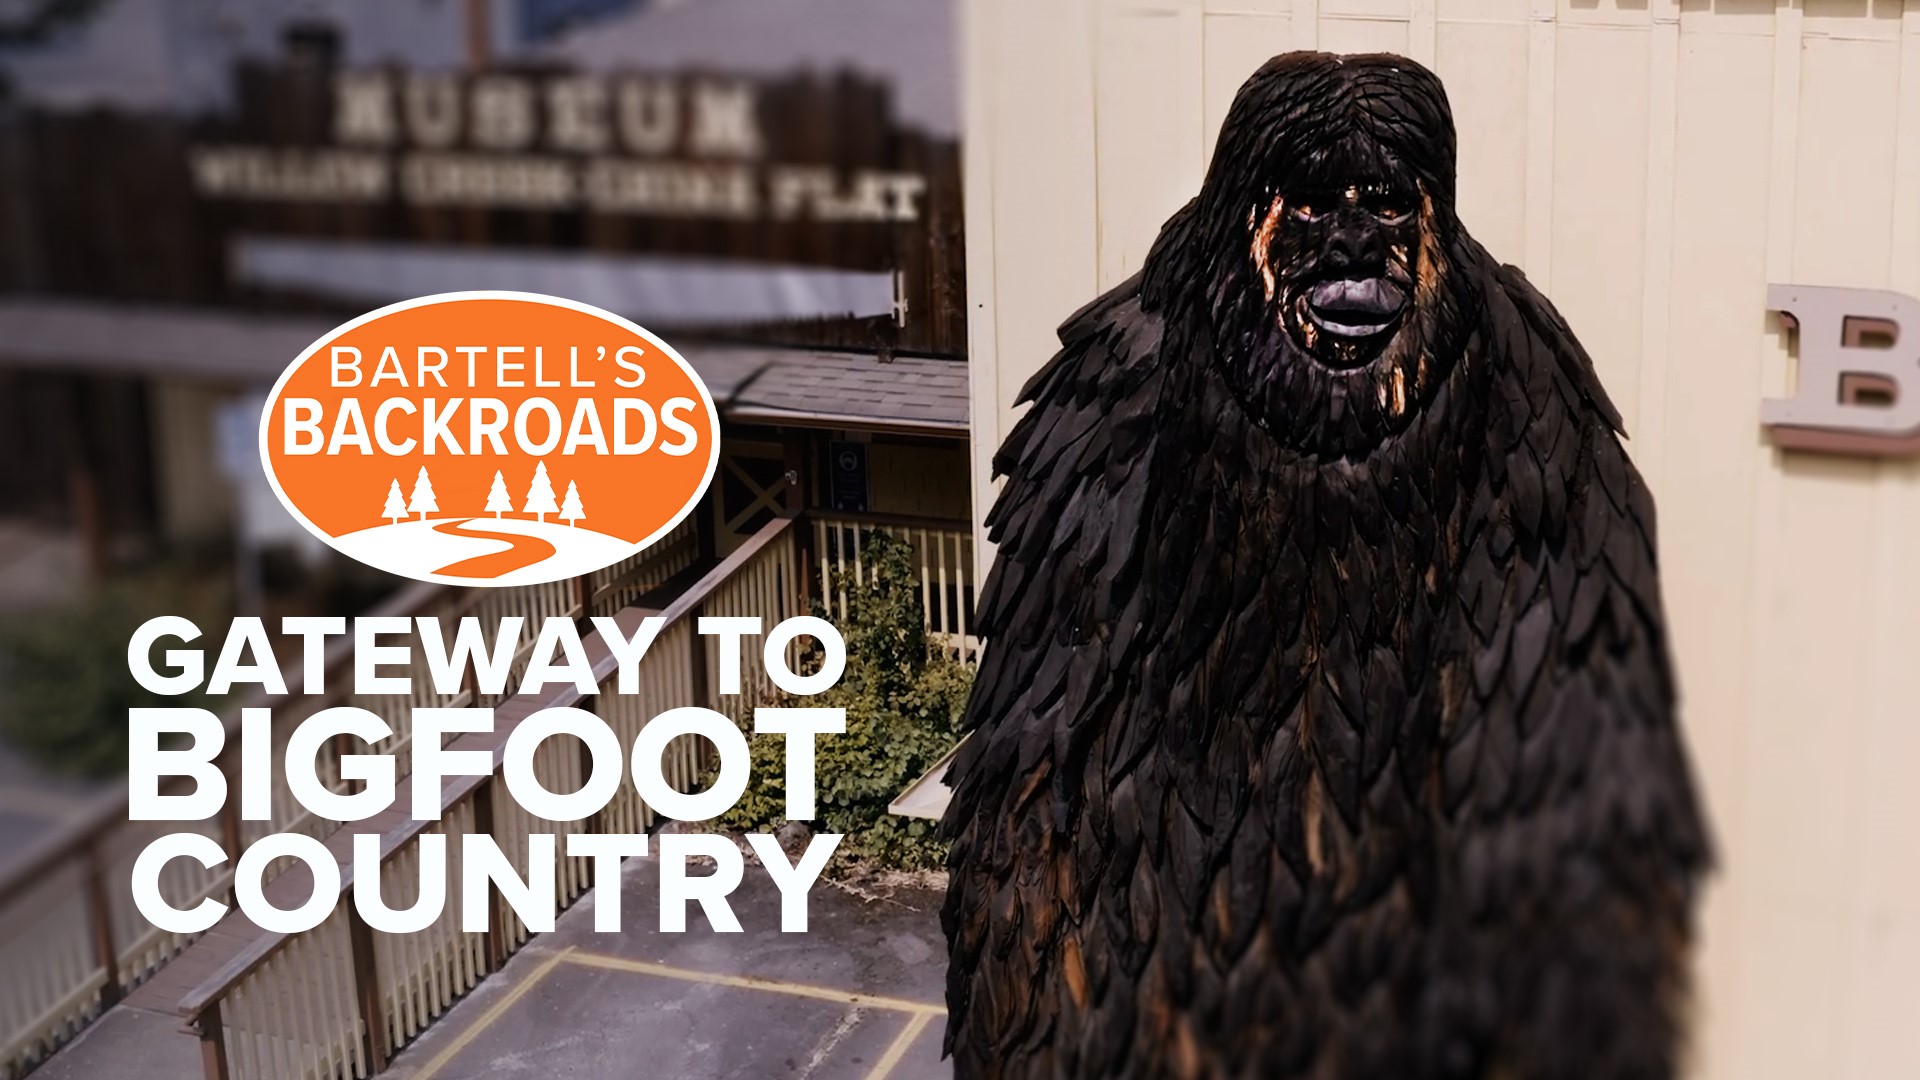 If you talk to just about anyone in Willow Creek, there's a pretty good chance they can tell you a Bigfoot story.